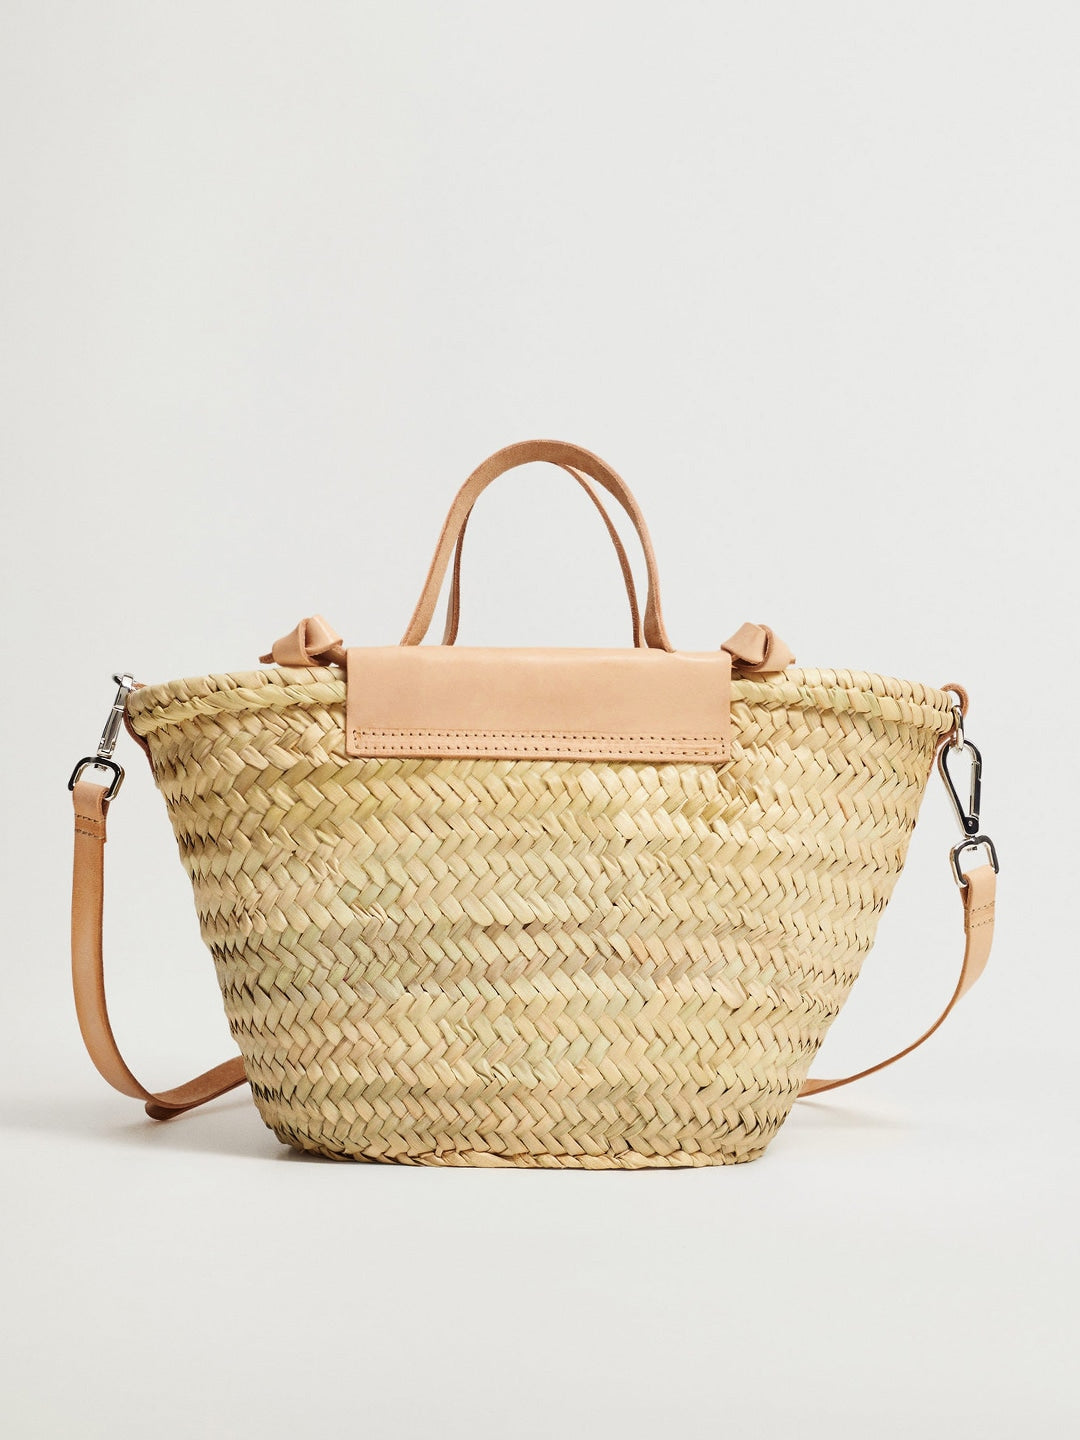 3a686320-33a7-4e0a-97dc-f10d7db49dd81631524756048-MANGO-Beige-Basket-Weave-Textured-Handcrafted-Sustainable-Ha-2